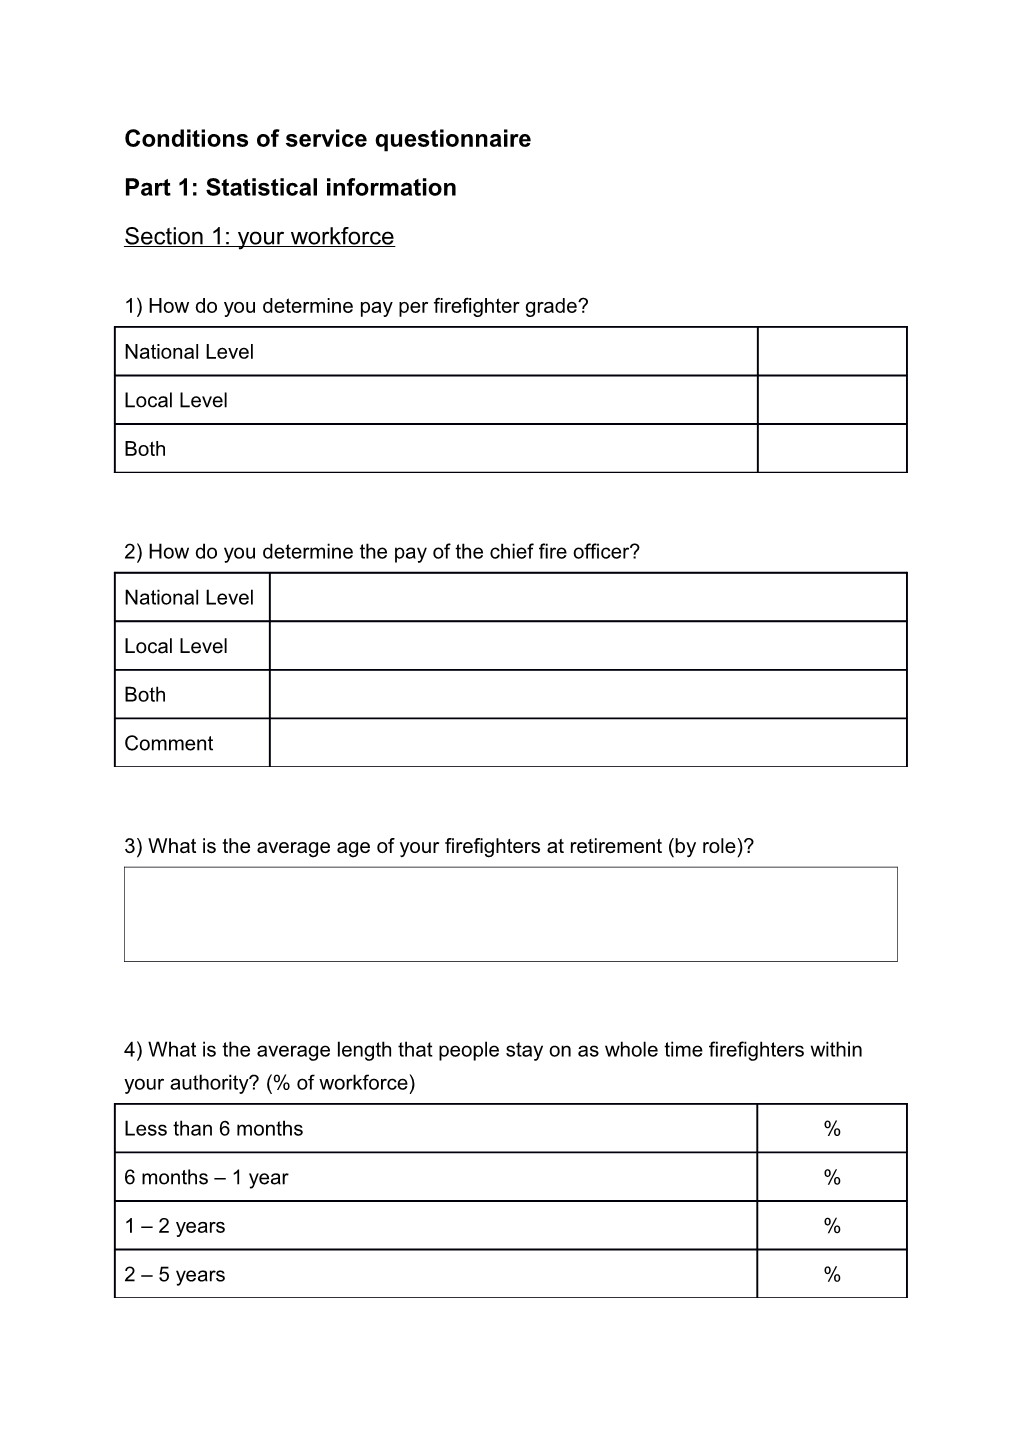 Conditions of Service Questionnaire